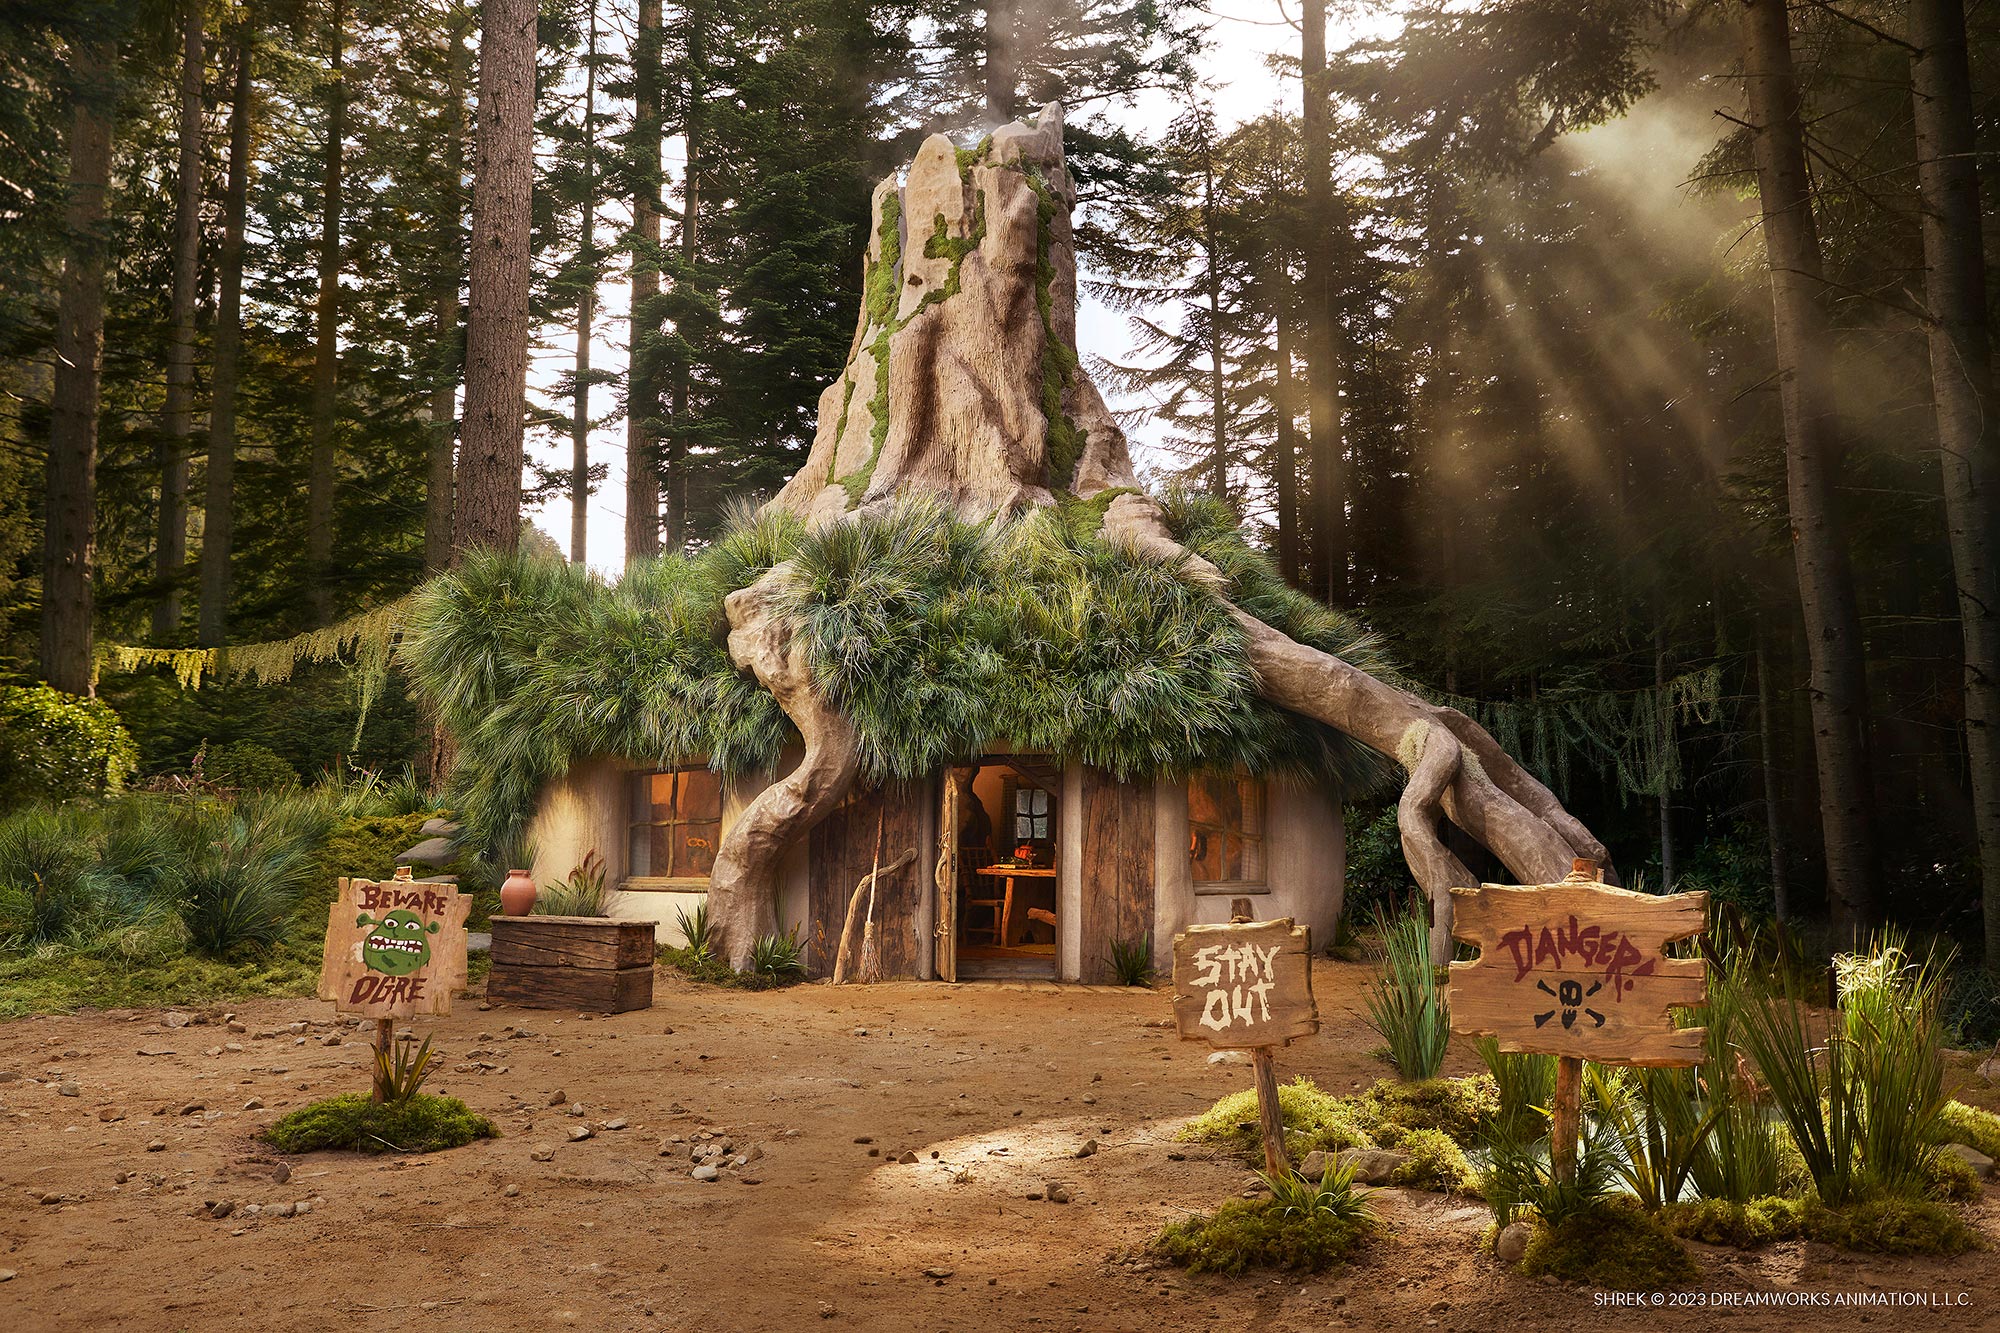 Airbnb Features Shrek's Swamp, Complete With Outhouse